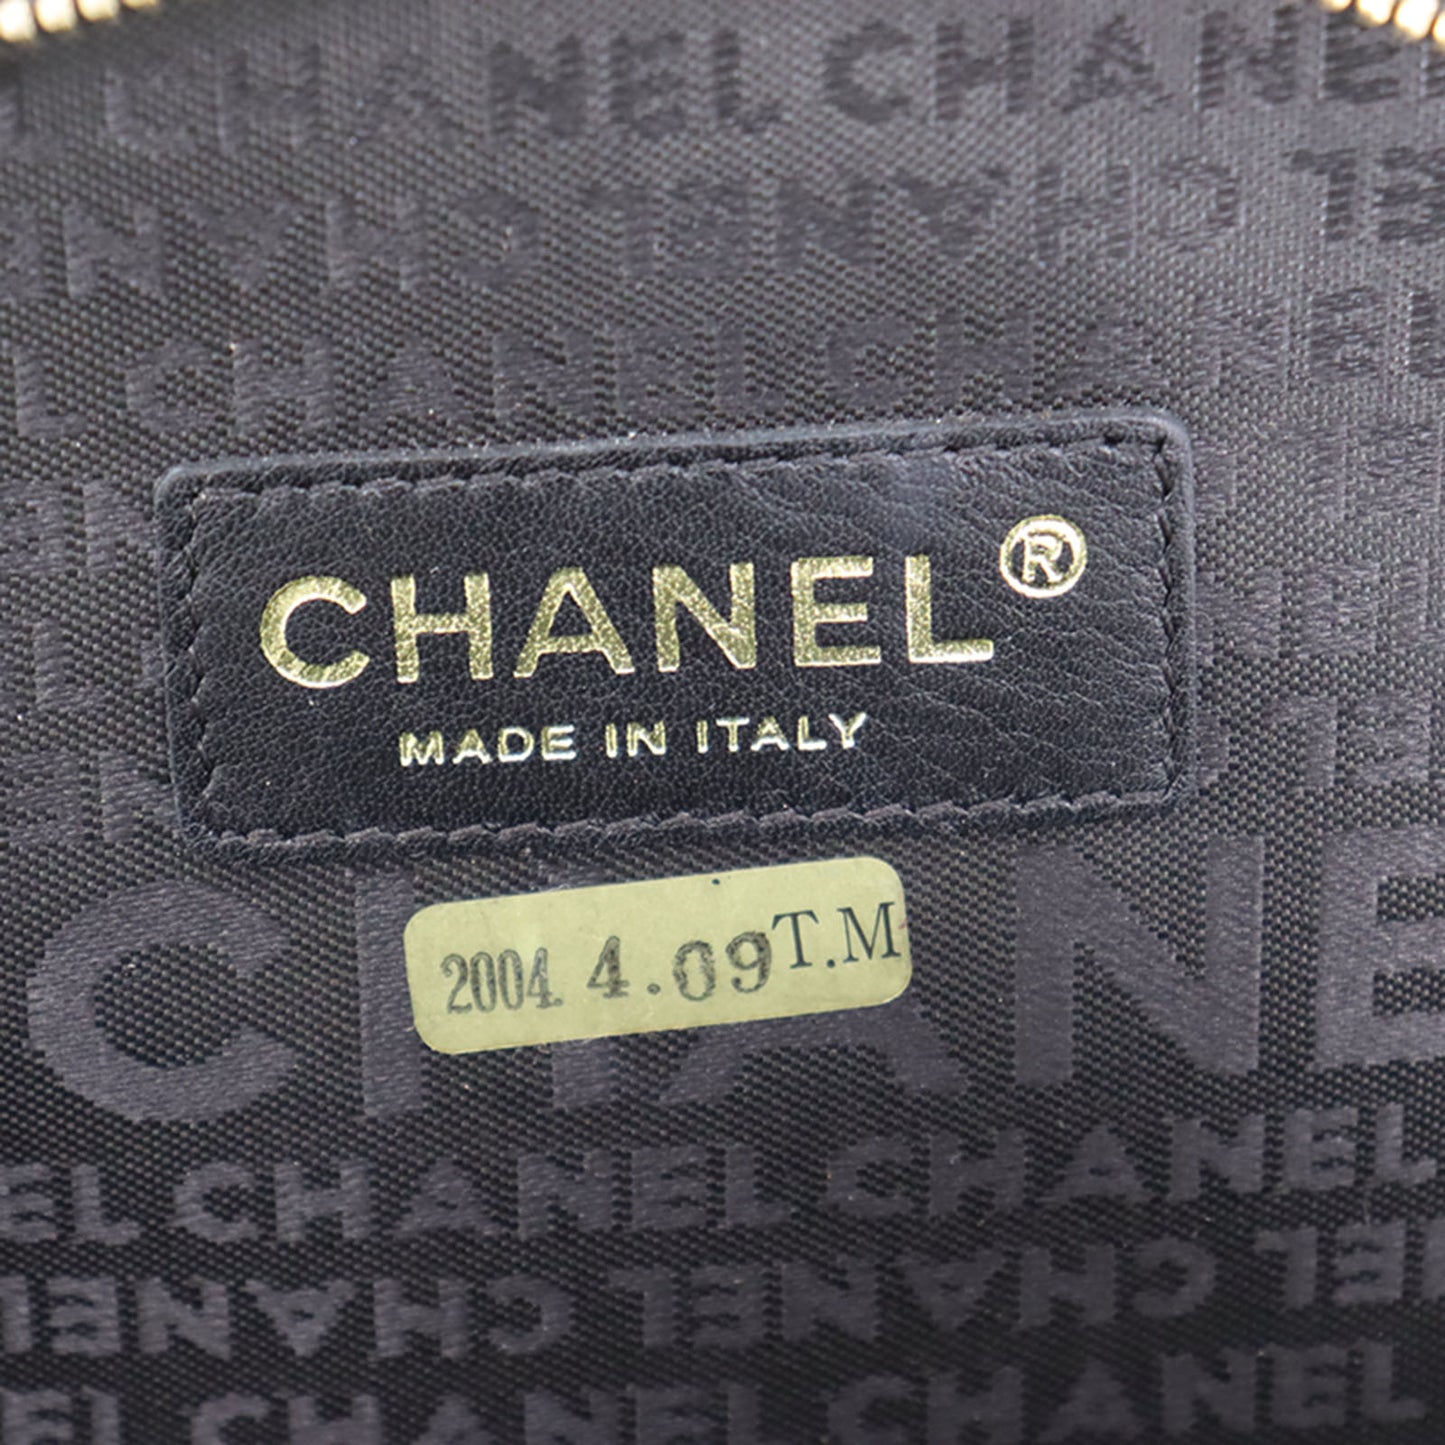 CHANEL Black Red Record Motif Disc Chain Clutch Bag Patent Leather #CJ876